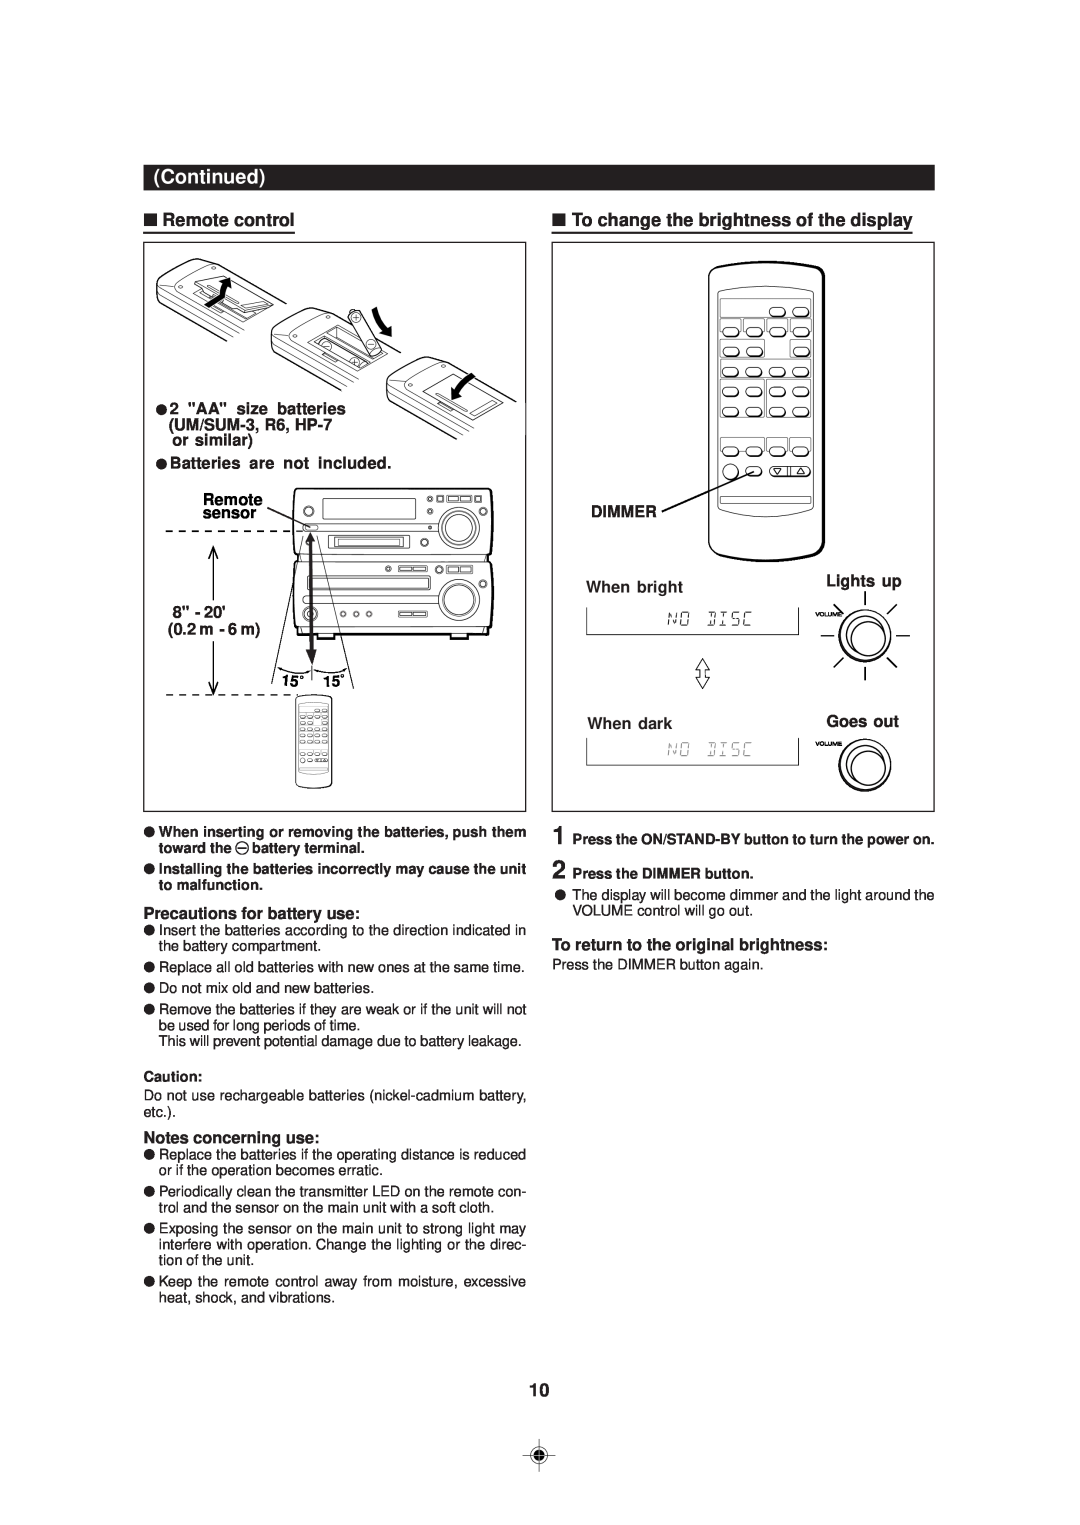 Sharp MD-MX30 operation manual To change the brightness of the display, Continued, Remote control 